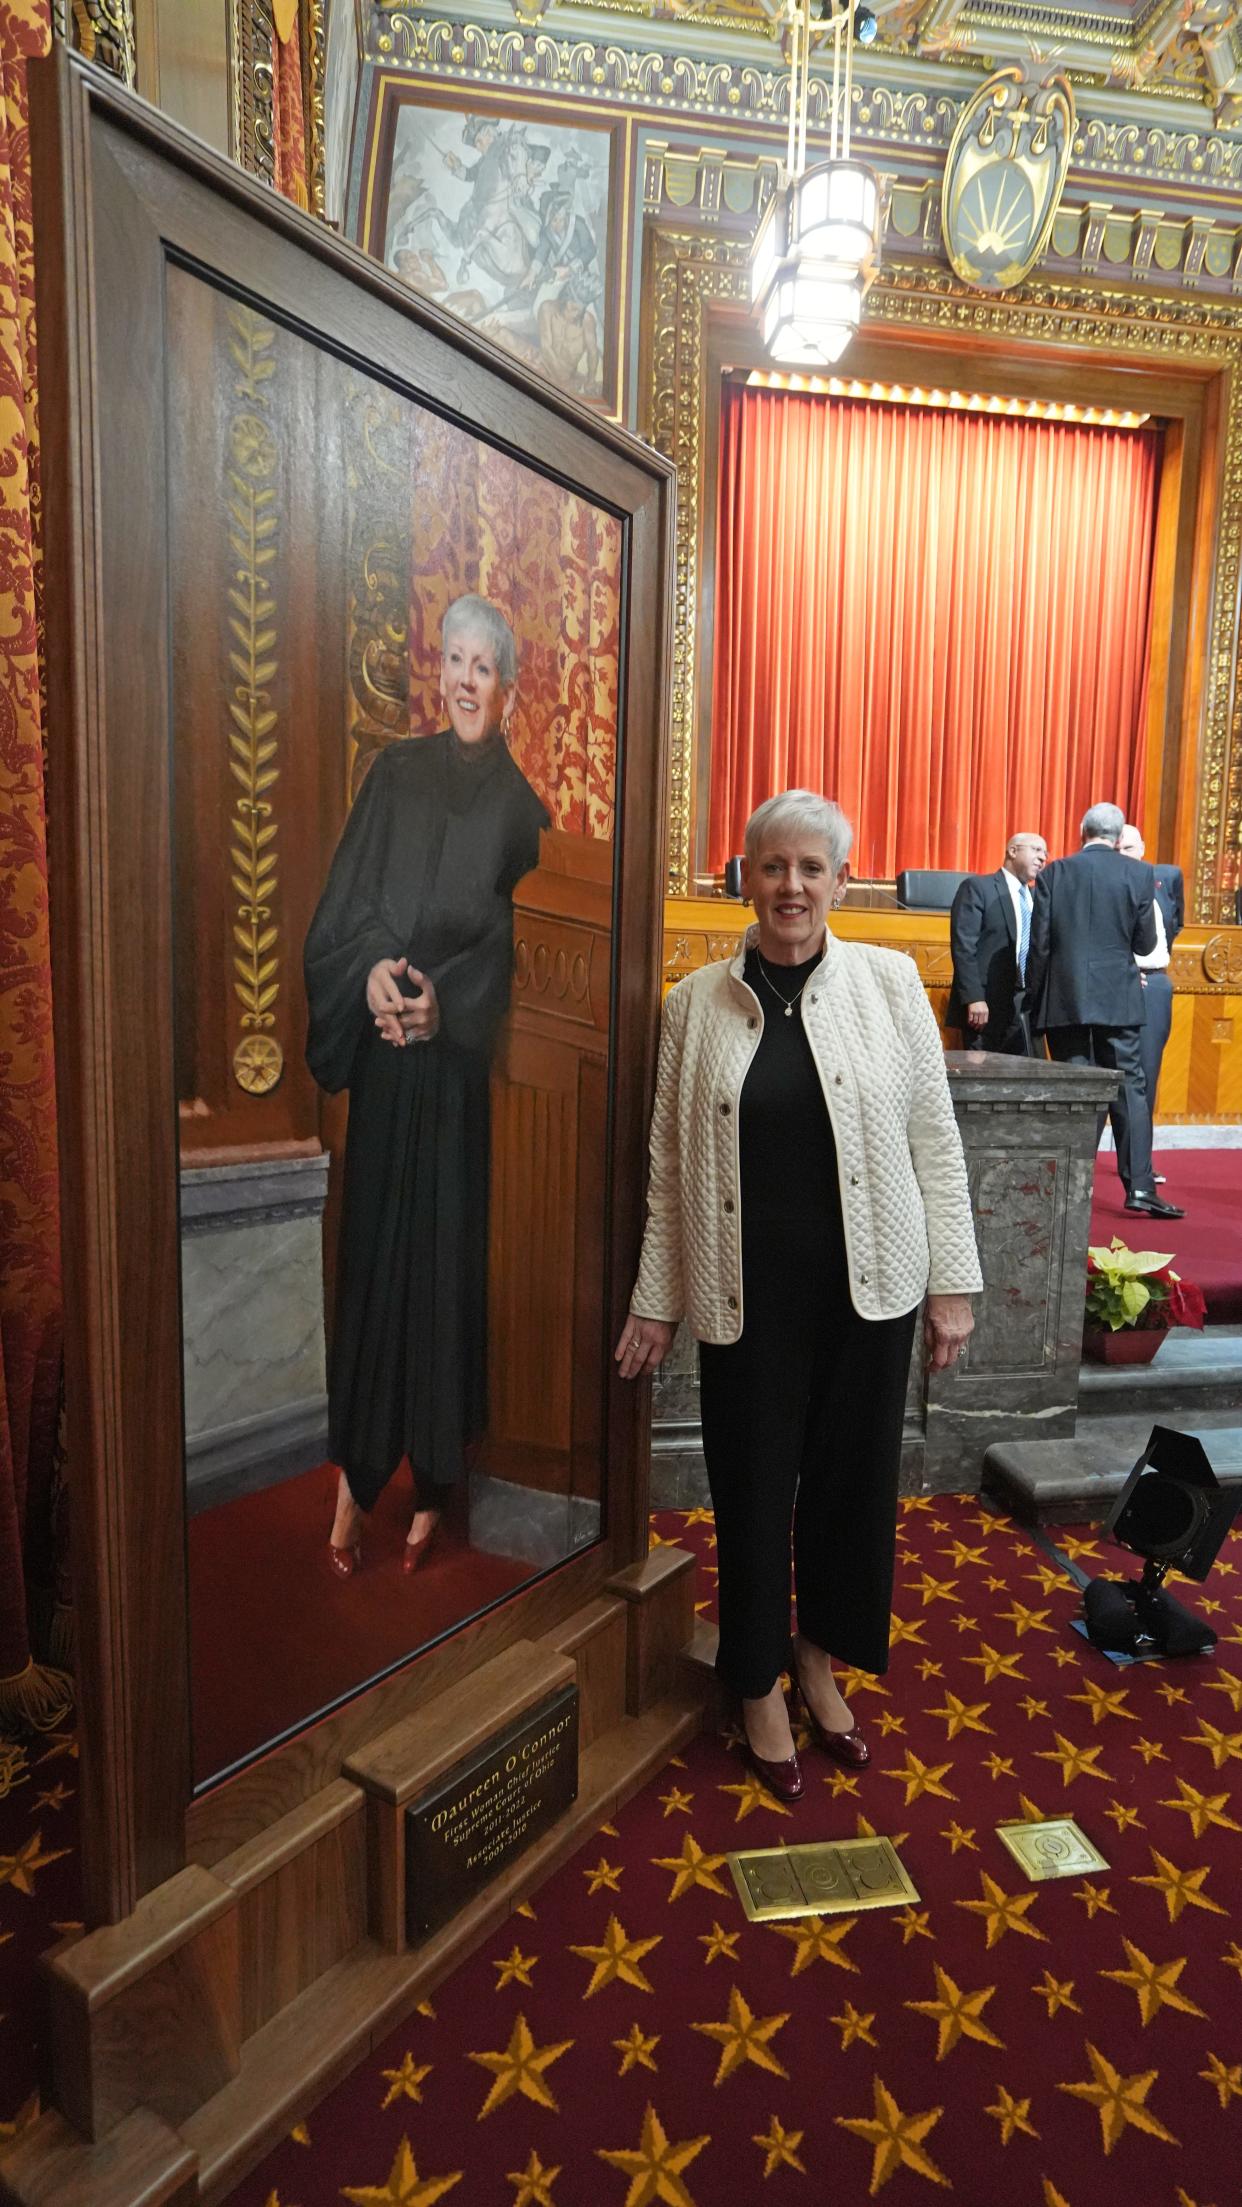 Former Ohio Supreme Court Chief Justice Maureen O'Connor poses next to her portrait after the dedication ceremony at the Thomas J. Moyer Ohio Judicial Center in December.